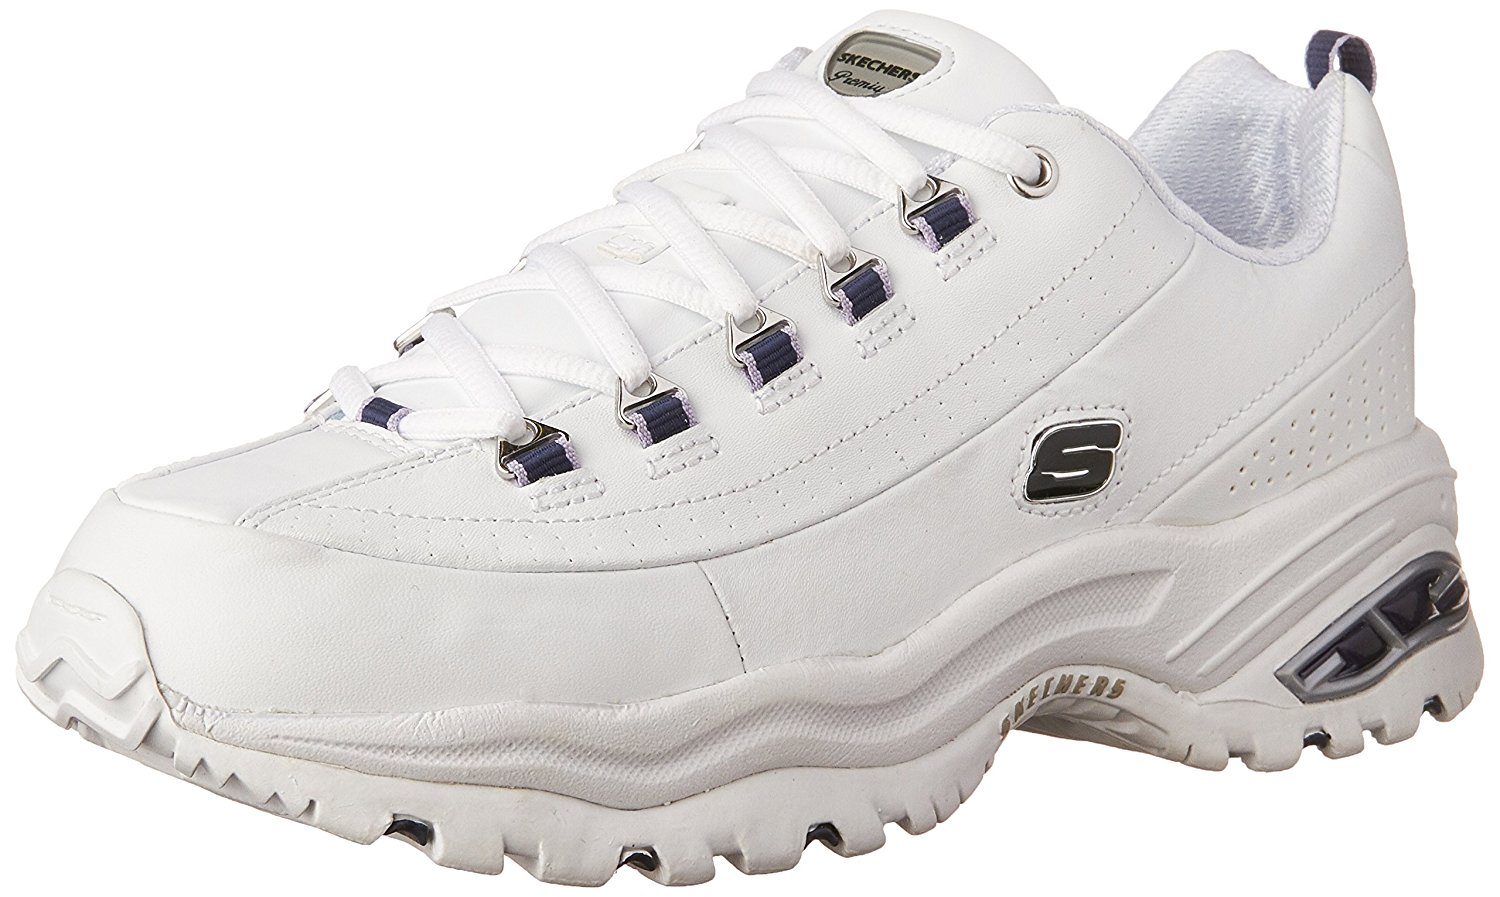 Skechers Womens 1728wnv Low Top Lace Up Walking Shoes, White/Navy, Size ...